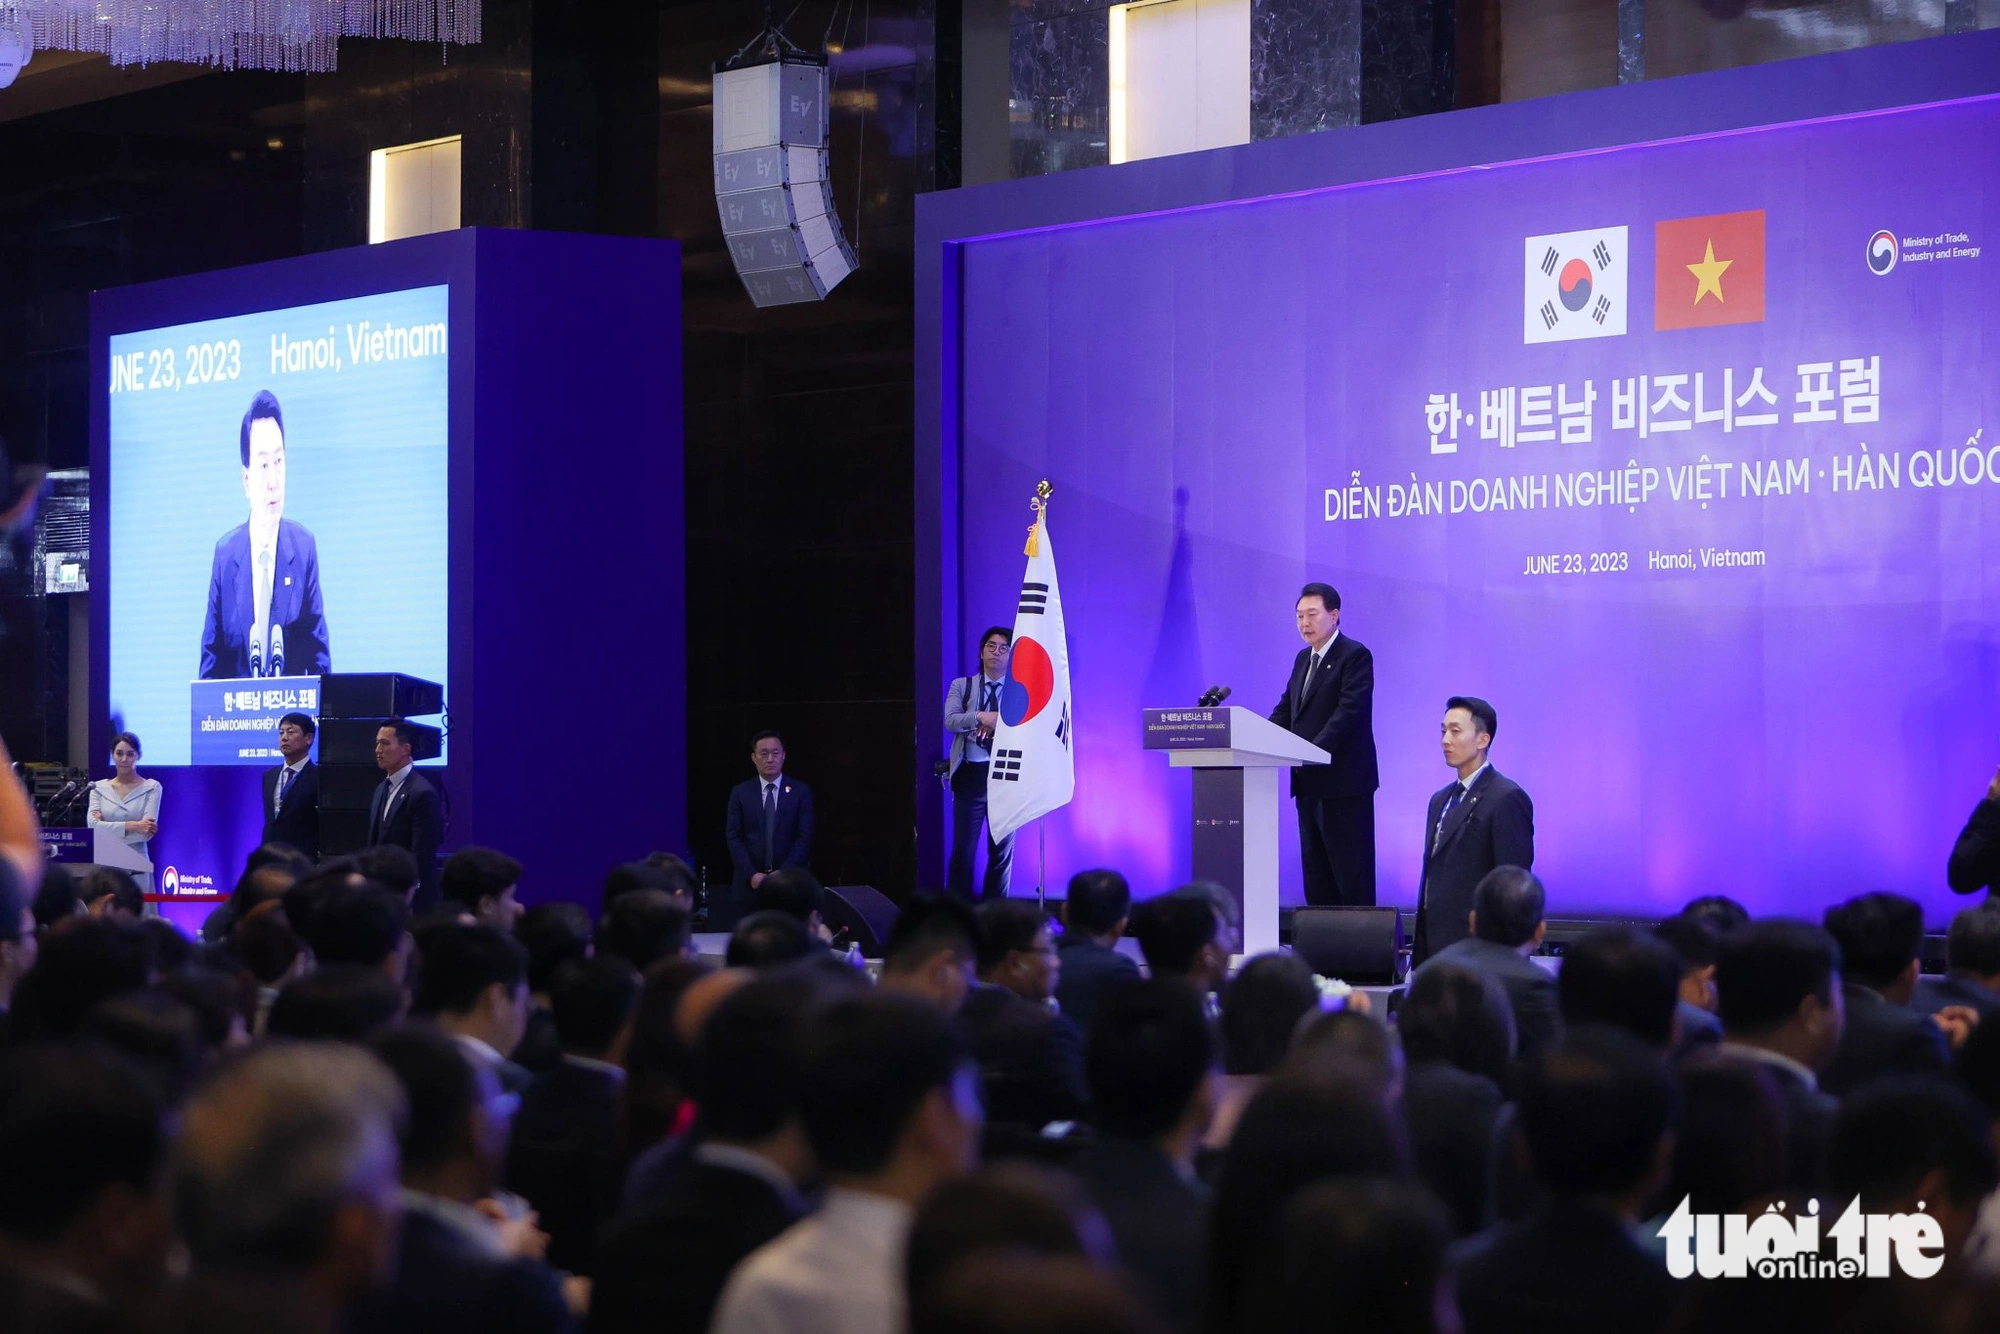 South Korean President Yoon Suk Yeol delivers a speech at the Vietnam-South Korea business forum held in Hanoi on June 23, 2023. Photo: Nguyen Khanh / Tuoi Tre